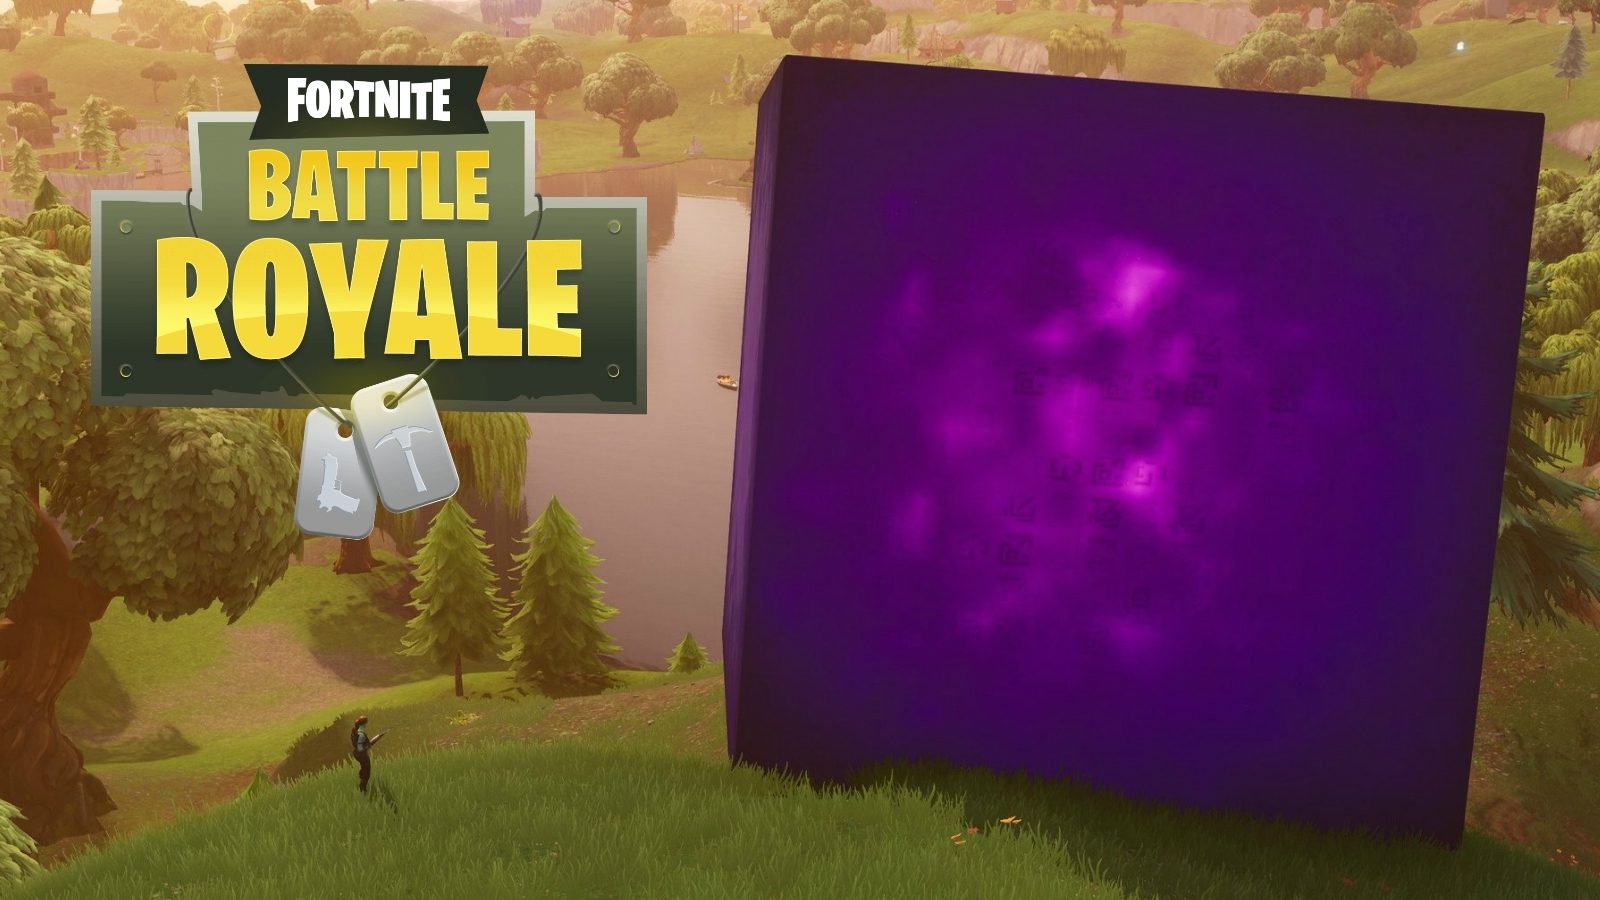 Fortnite Players Have Spotted Kevin The Cube In Game A Strange